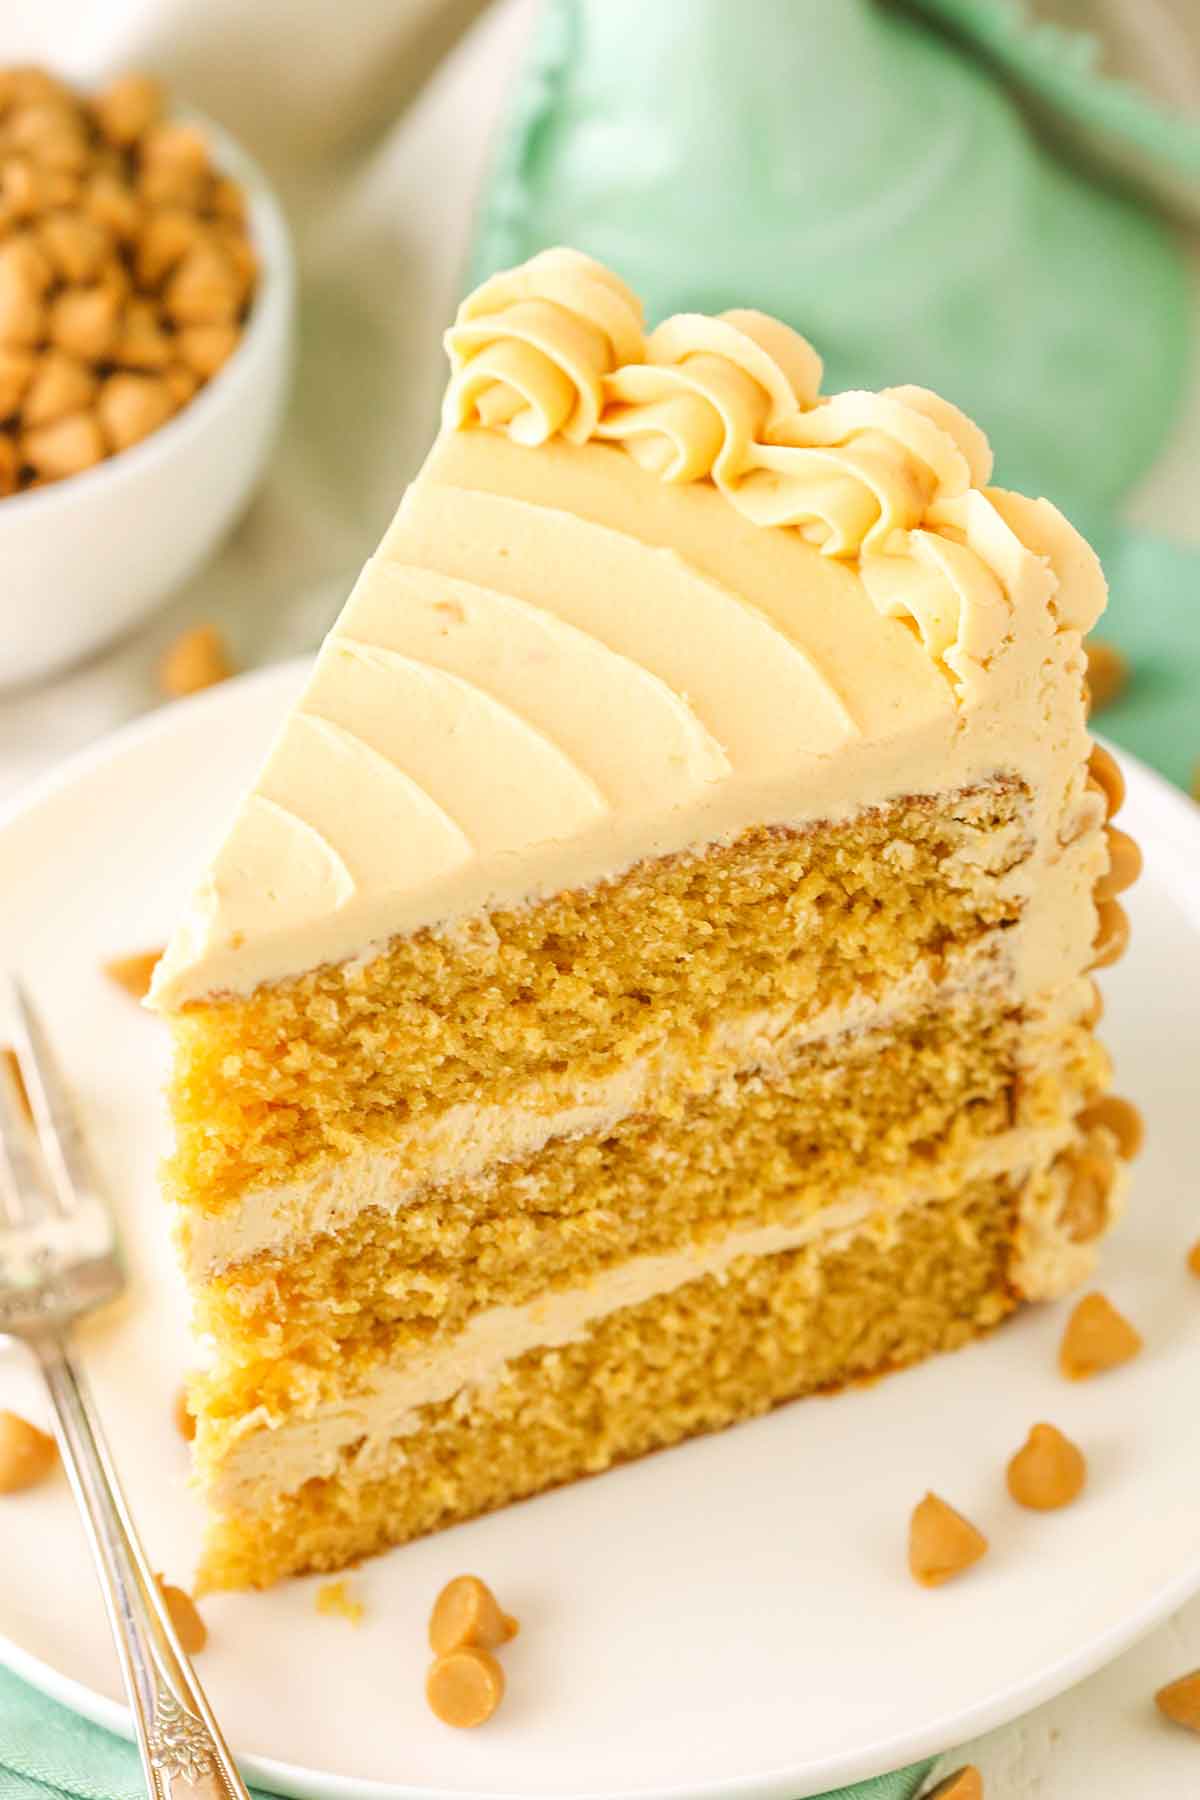 A slice of Ultimate Butterscotch Cake next to a fork on a white plate